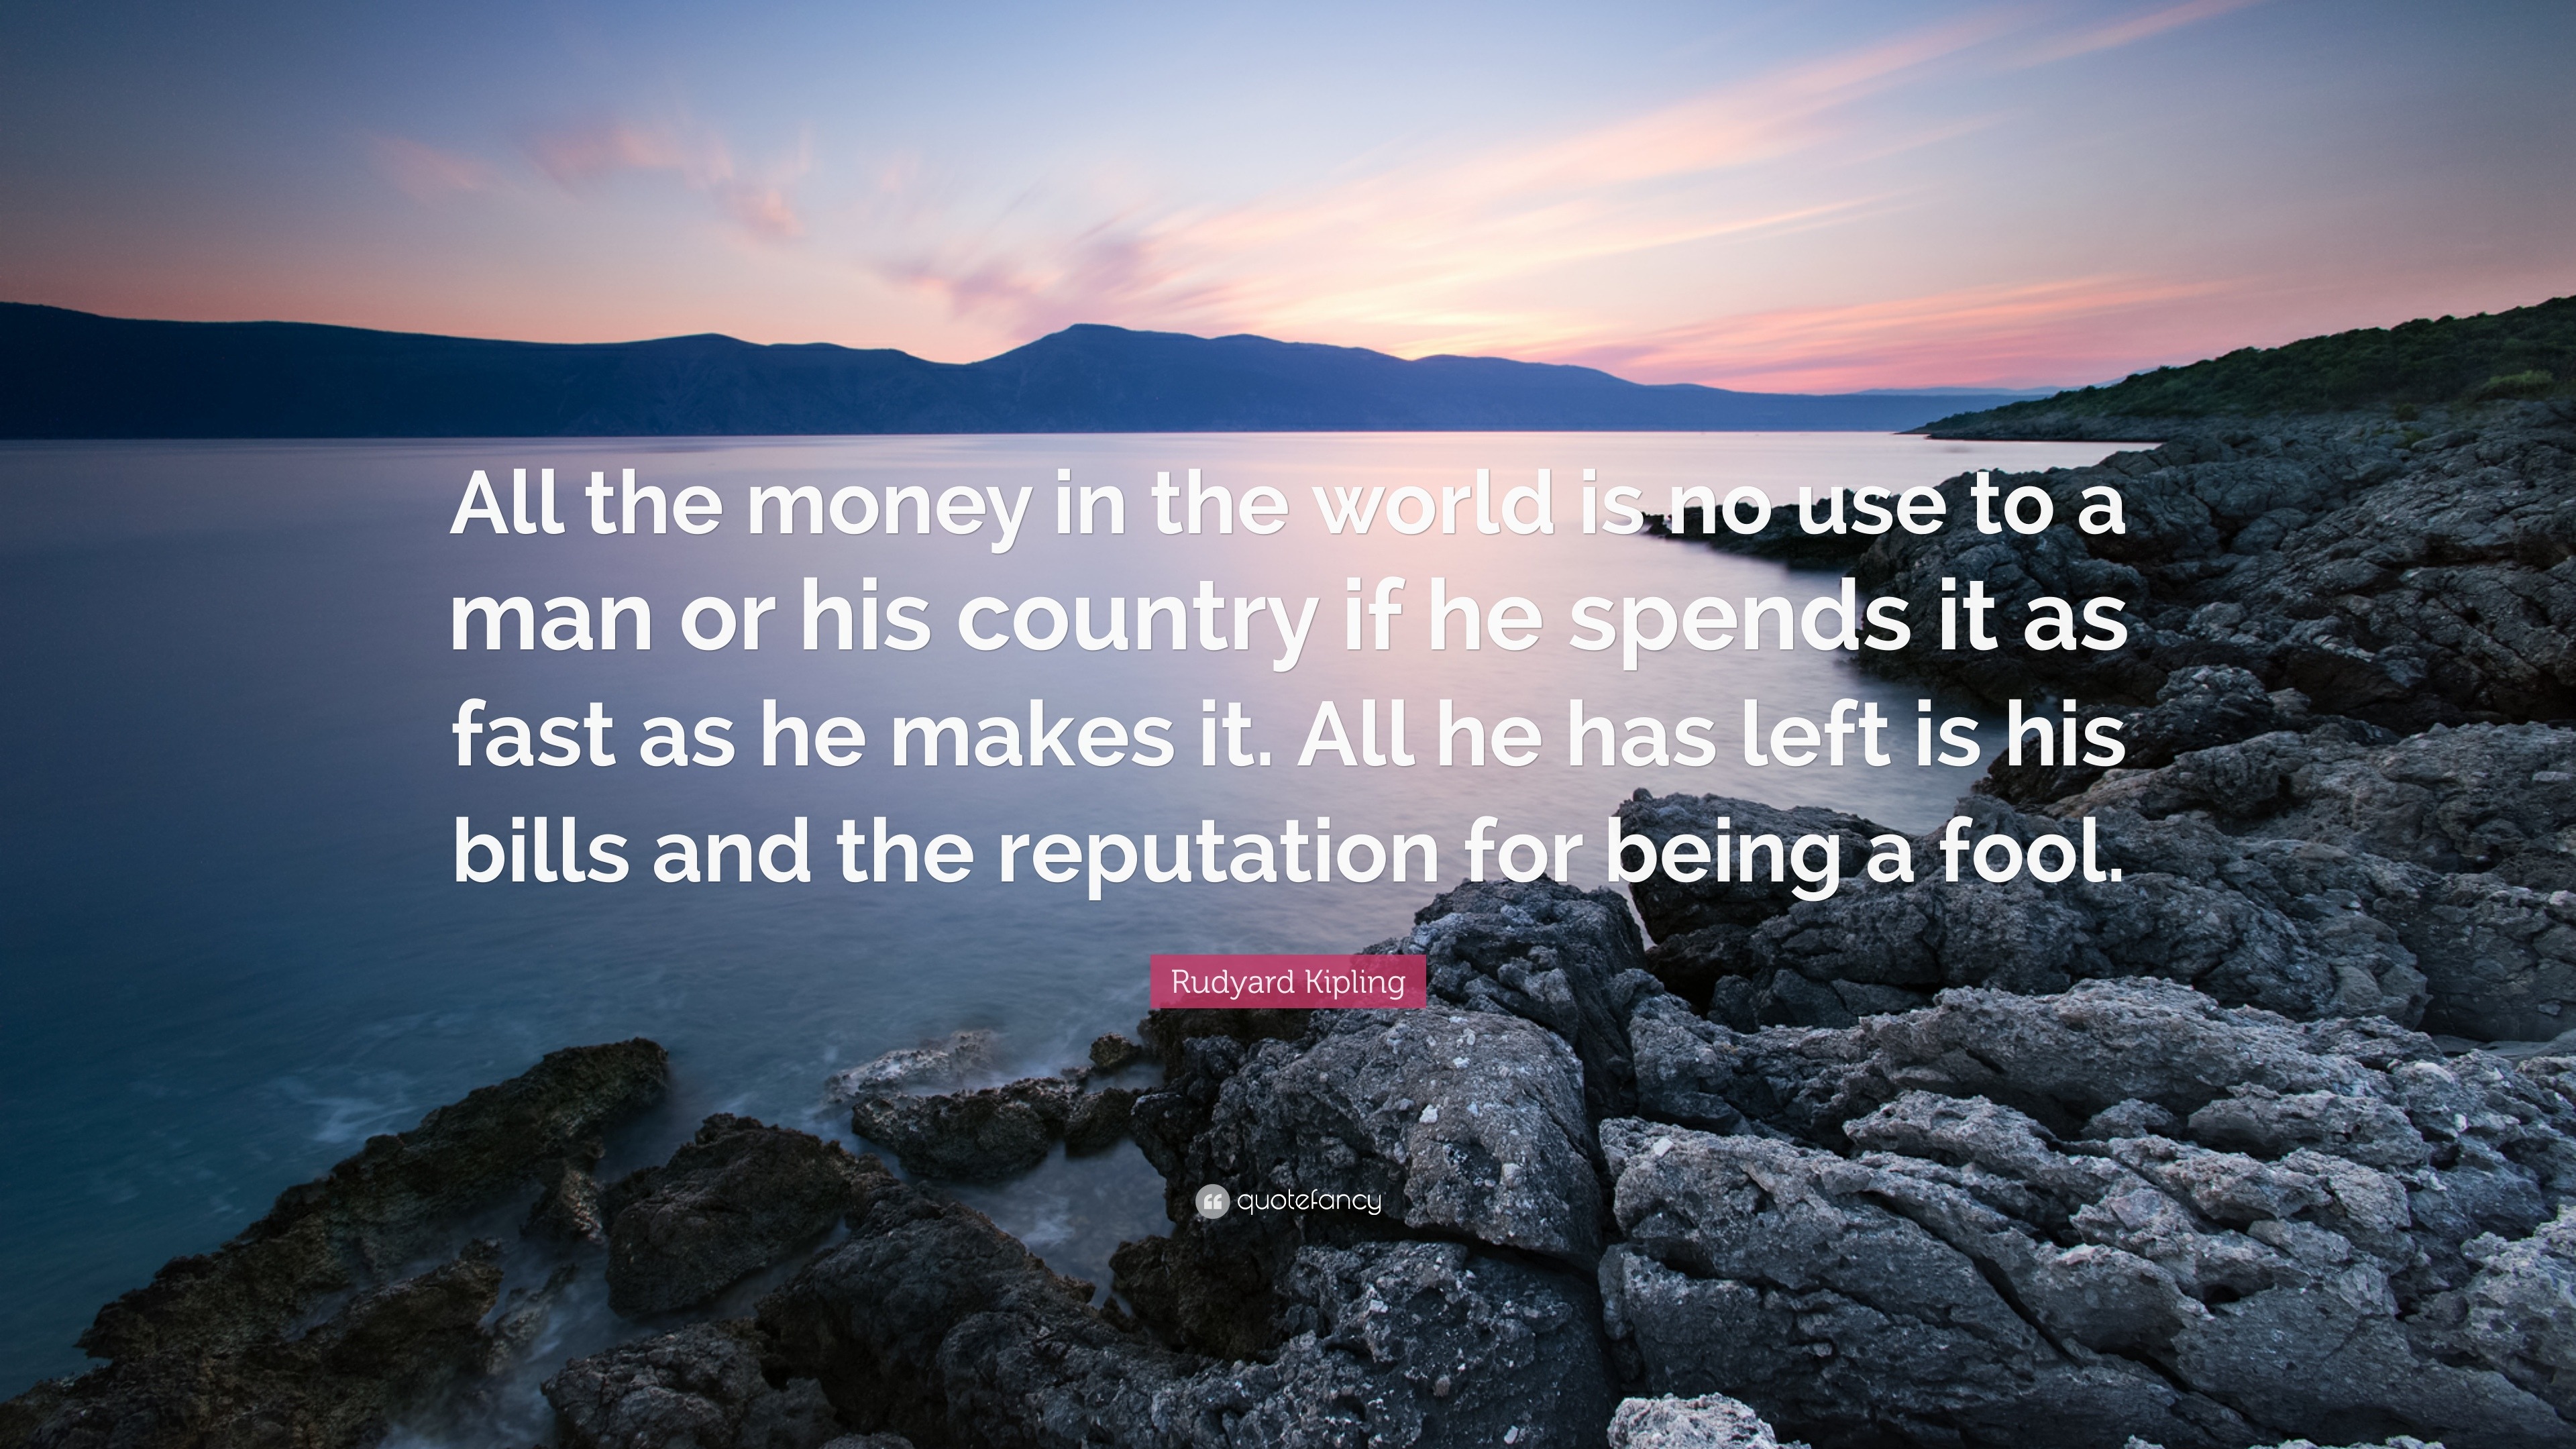 Rudyard Kipling Quote: “All the money in the world is no use to a man or